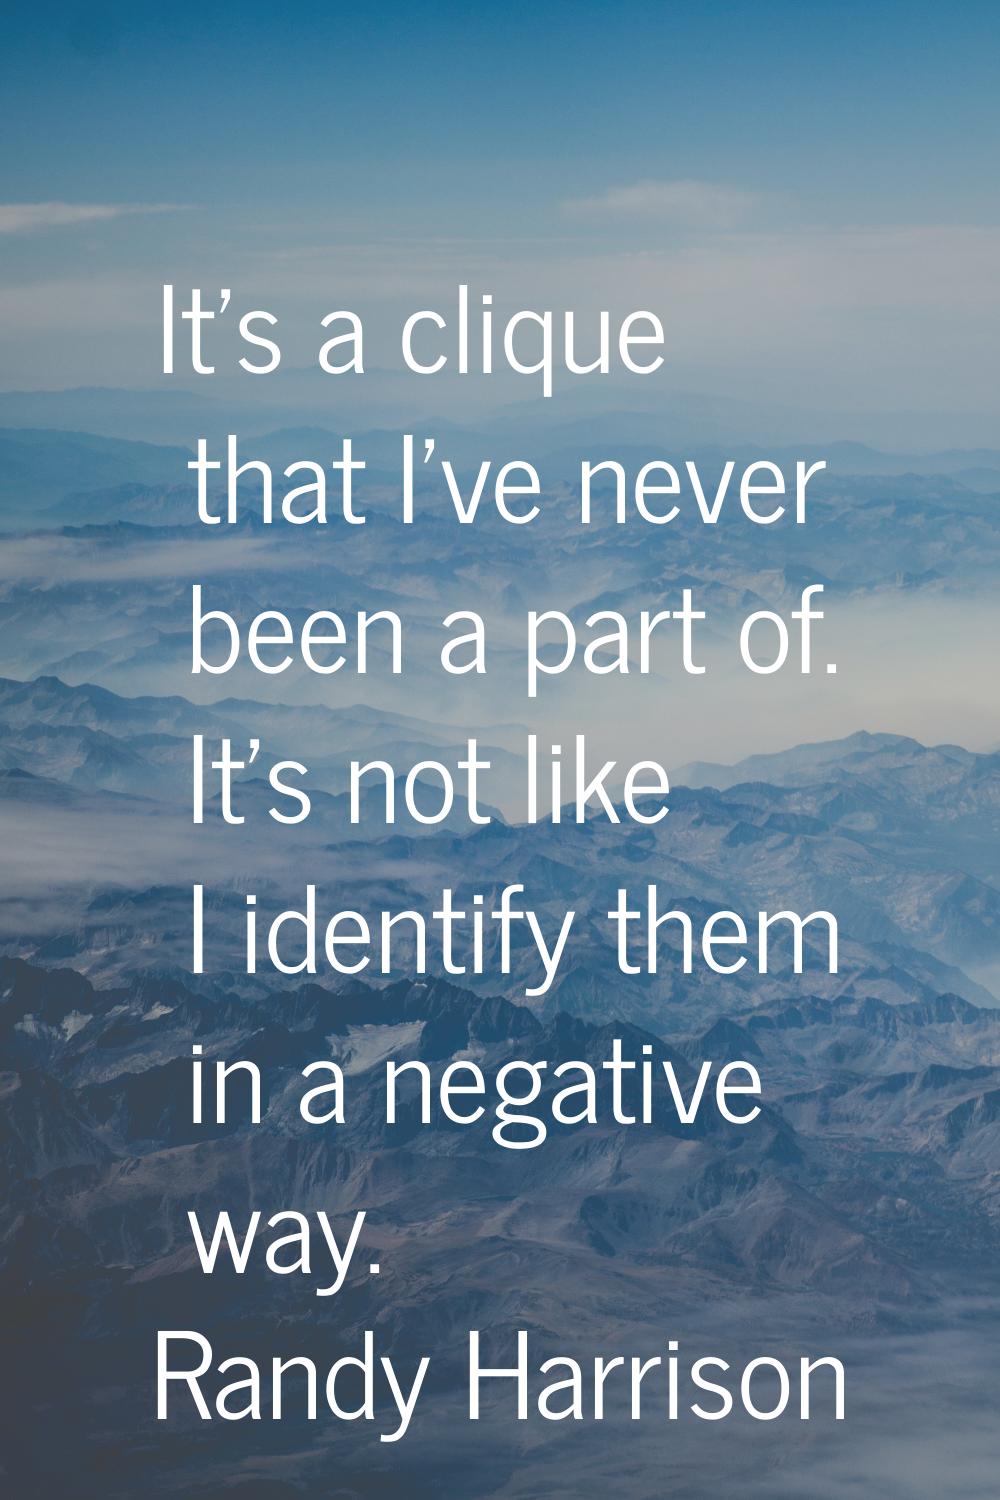 It's a clique that I've never been a part of. It's not like I identify them in a negative way.